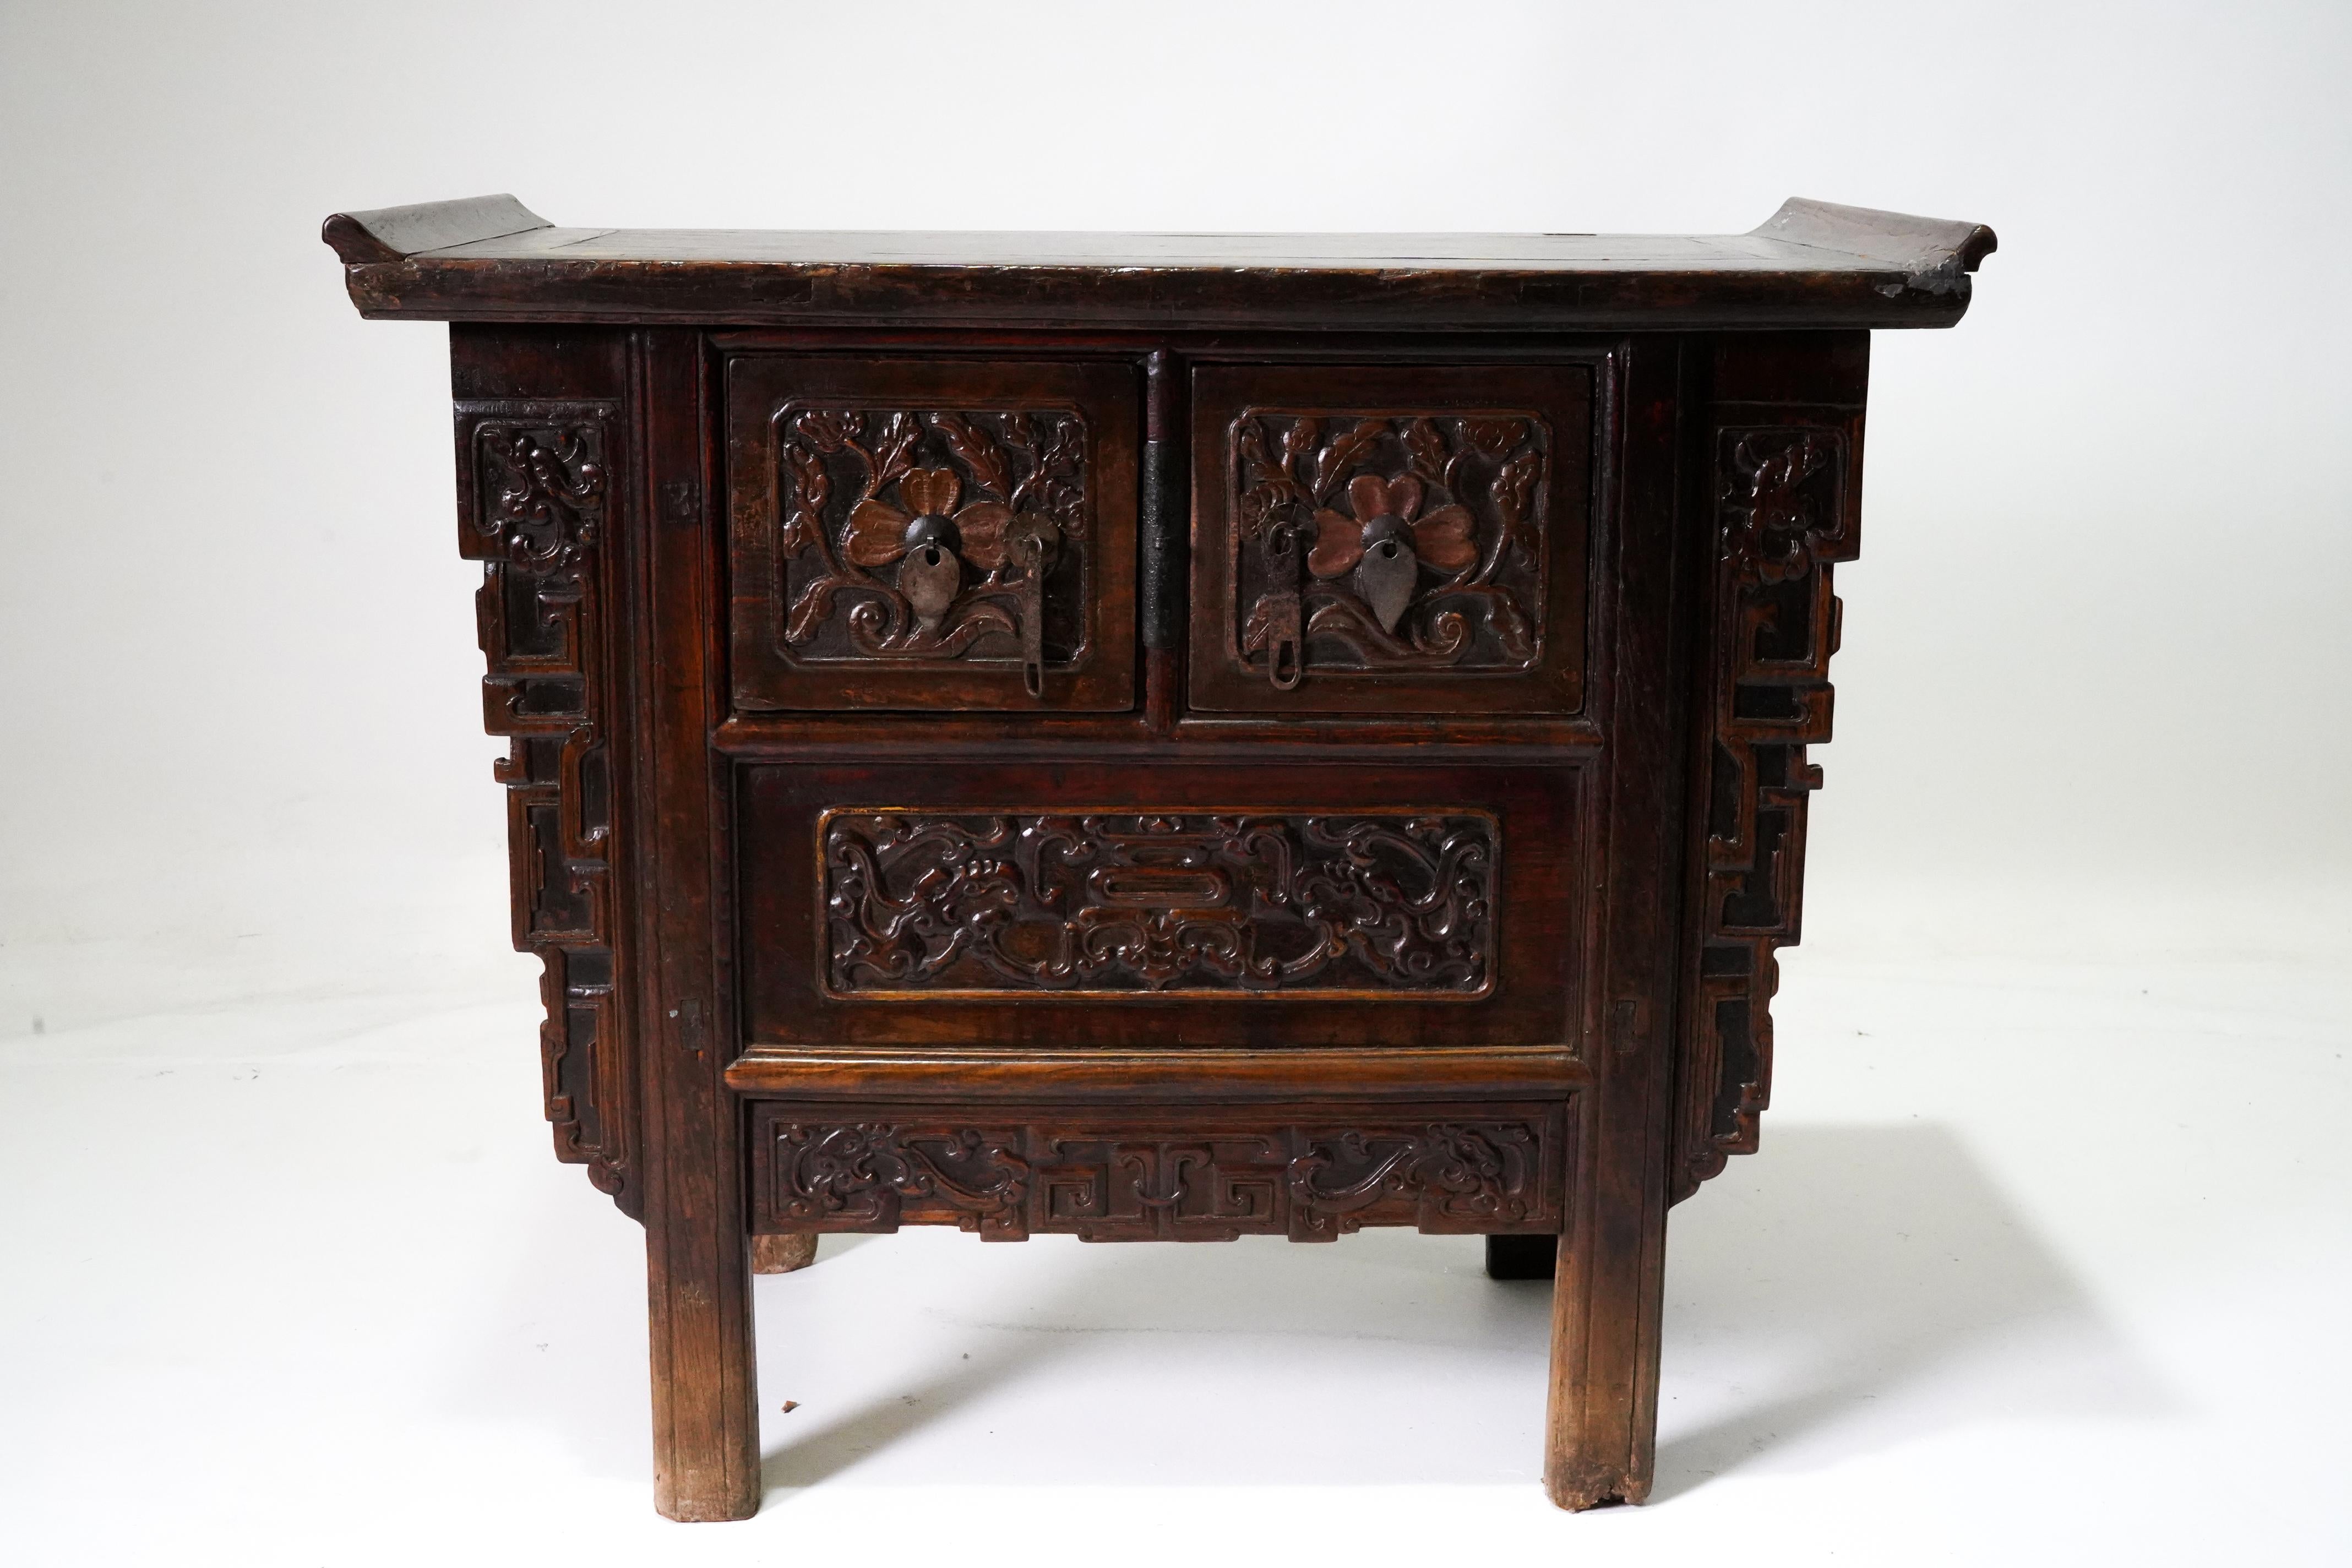 A Chinese Qing wooden butterfly cabinet from the 19th century, with carved spandrels, drawers, doors and a dark oxblood patina. This elegant small coffer, sometimes called a butterfly cabinet, features a floating panel top sitting above two carved